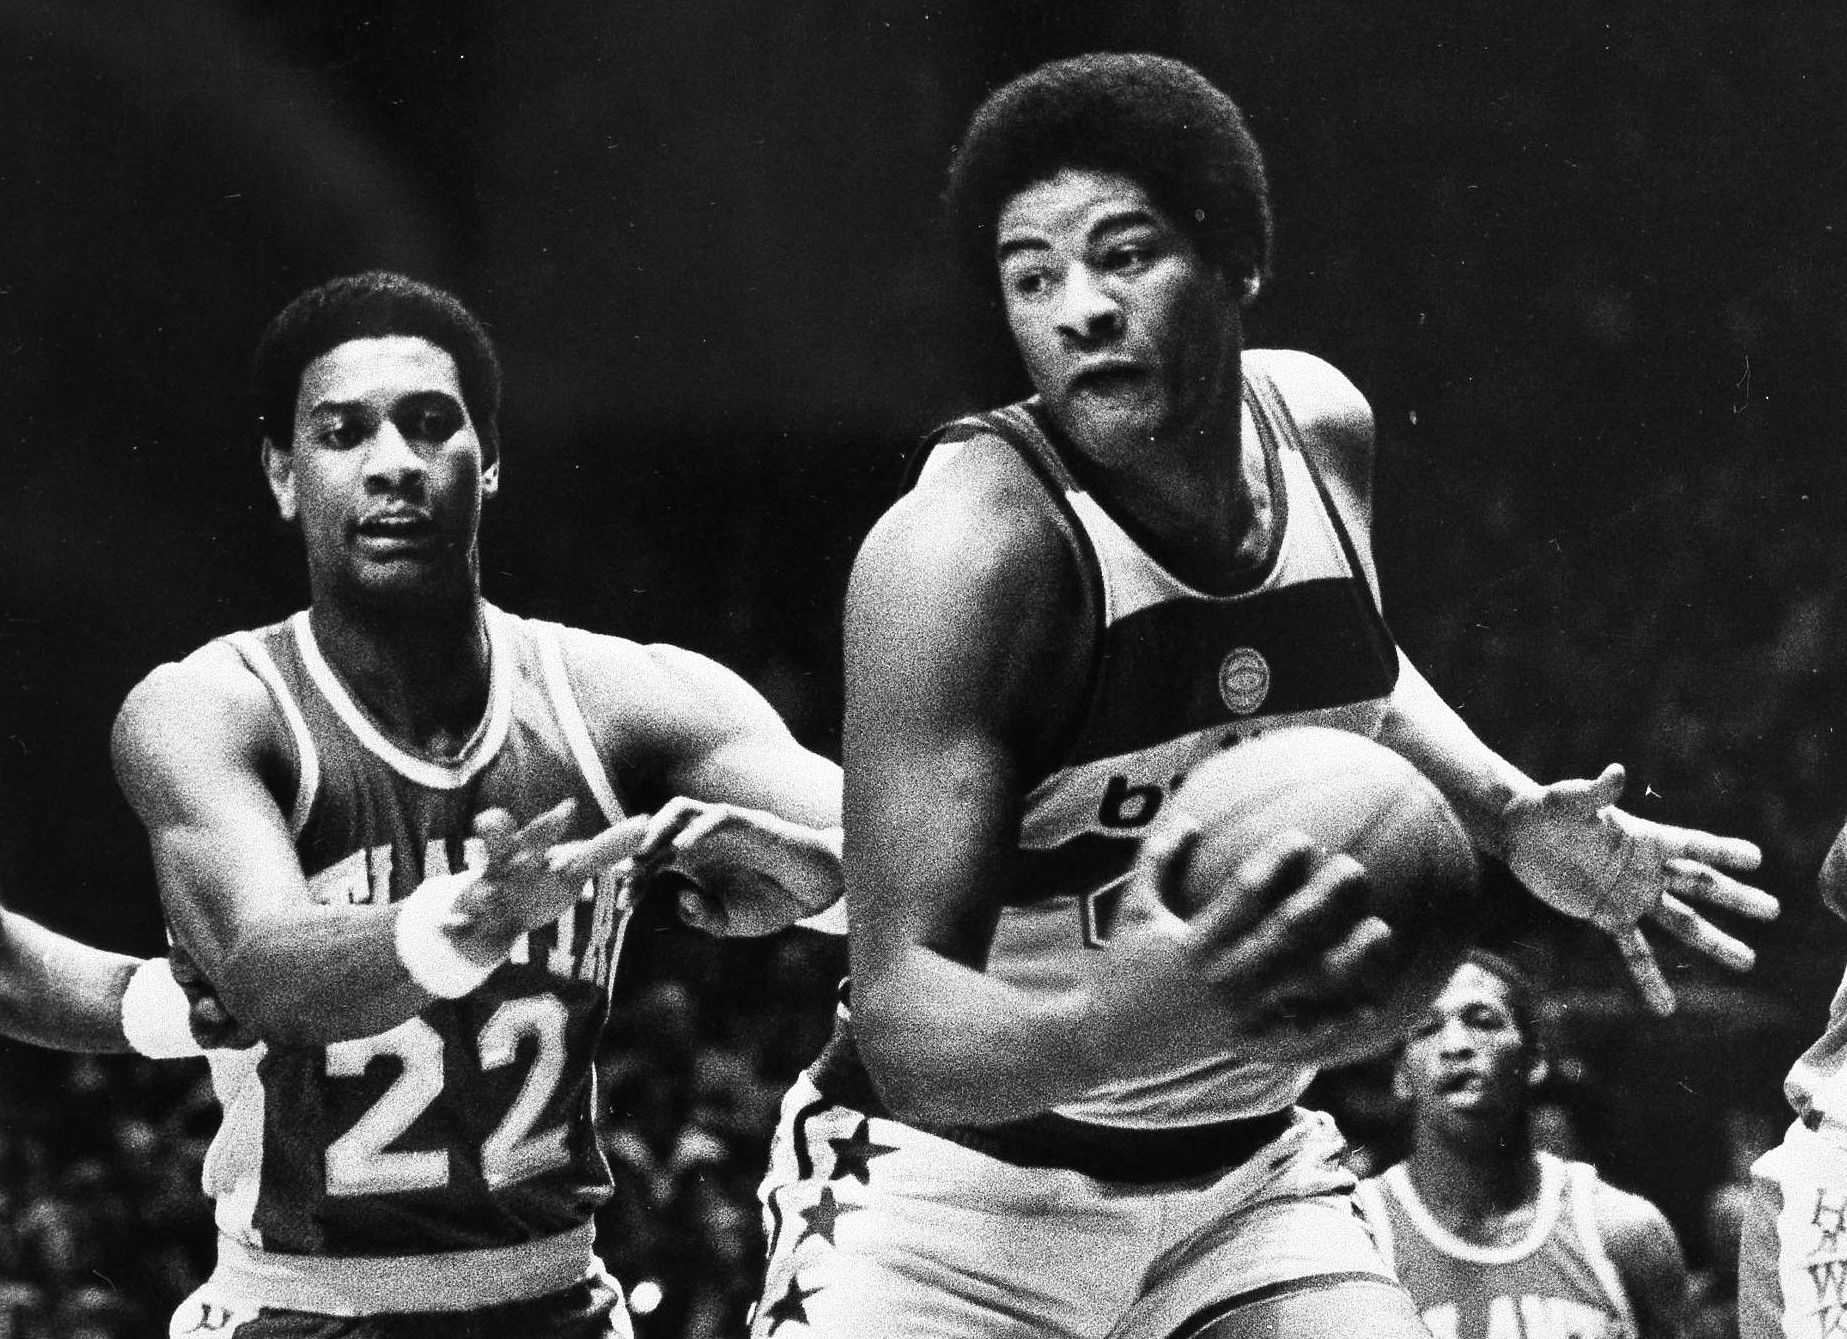 NBA: Wes Unseld passes away at age 74 - Bullets Forever